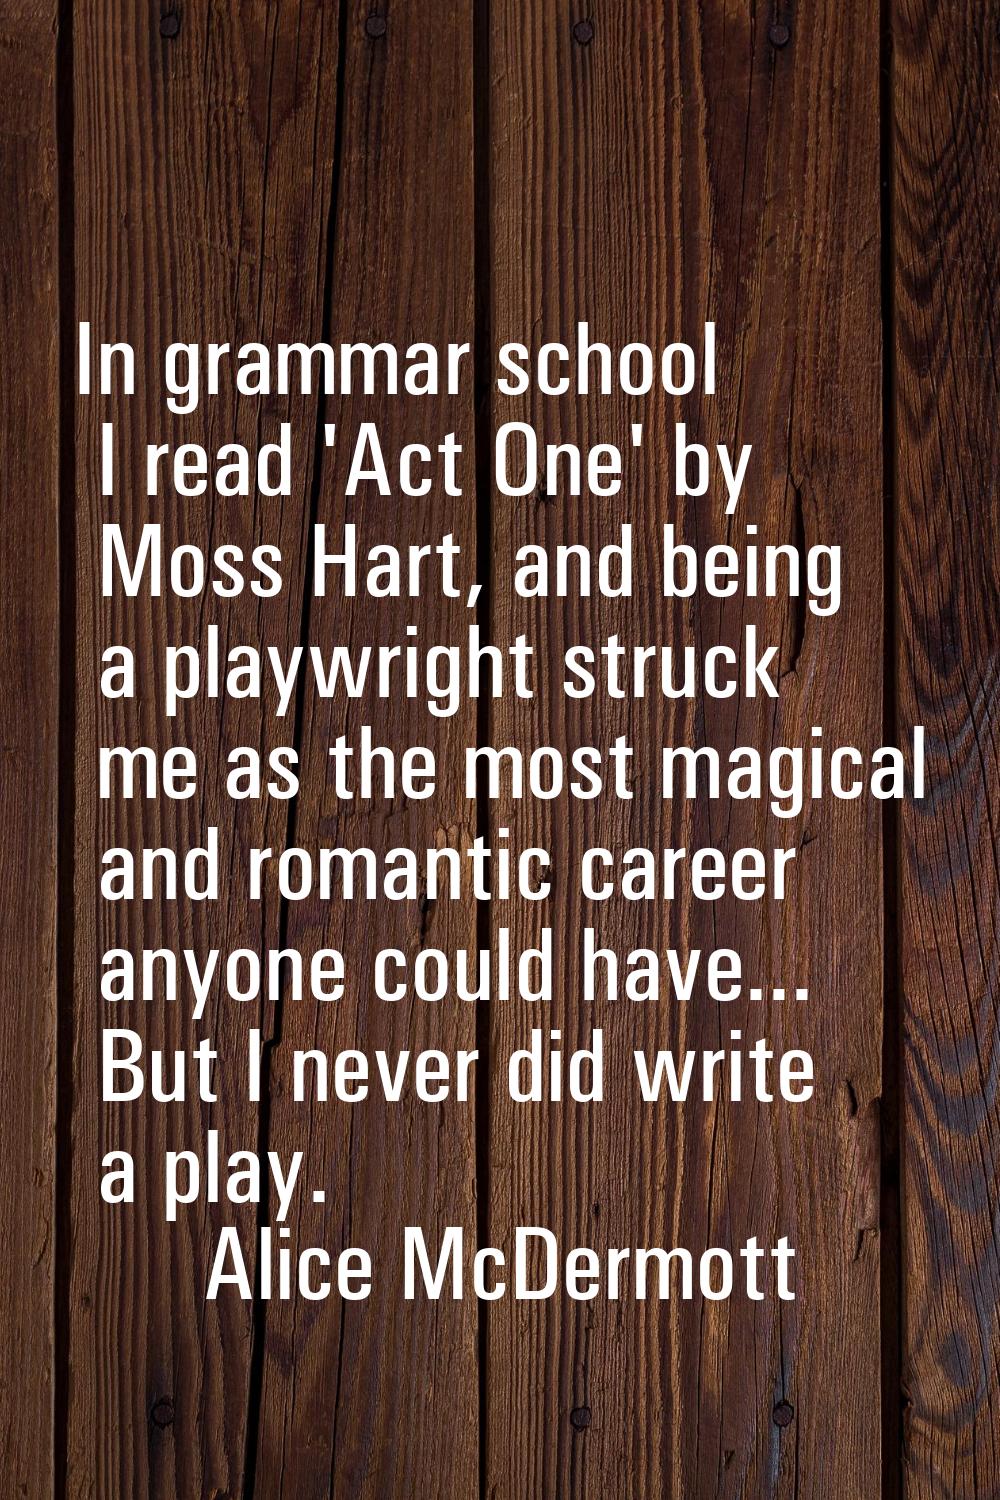 In grammar school I read 'Act One' by Moss Hart, and being a playwright struck me as the most magic